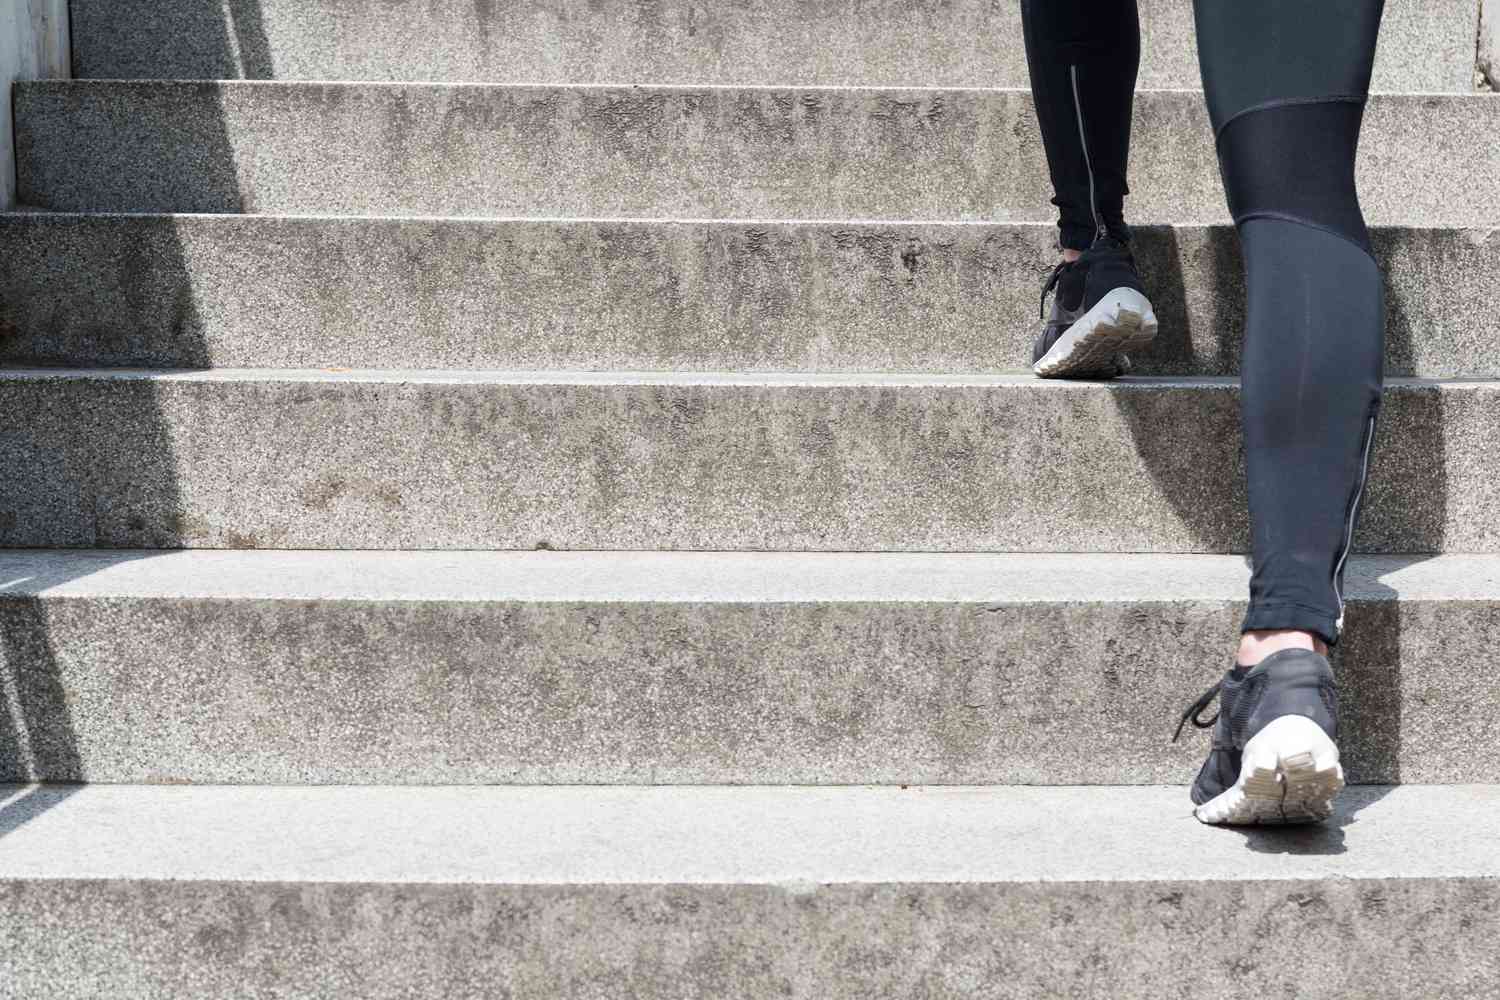 Power Up Your Stair Climbs